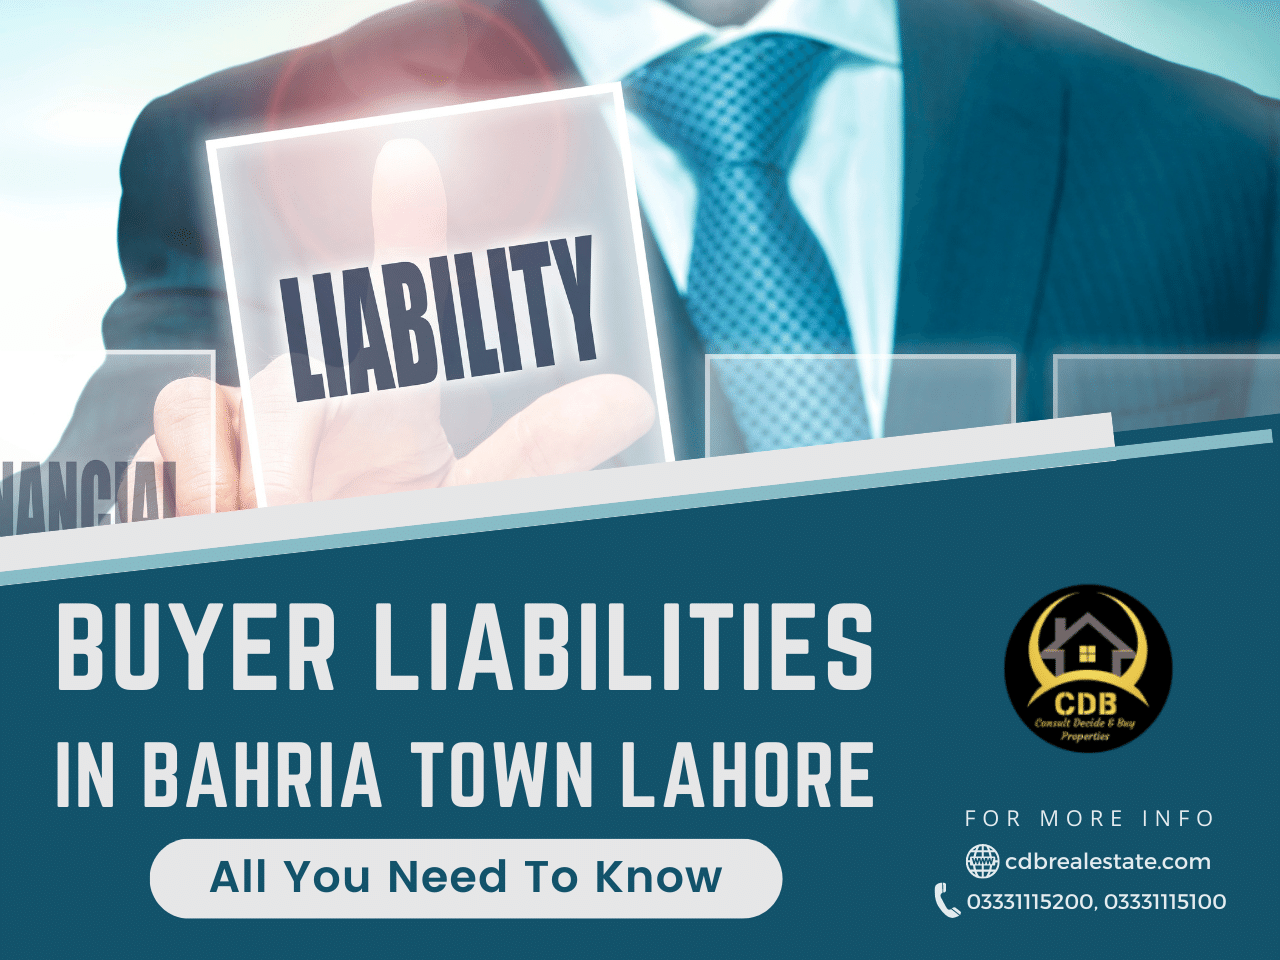 Buyer Liabilities in Bahria Town Lahore